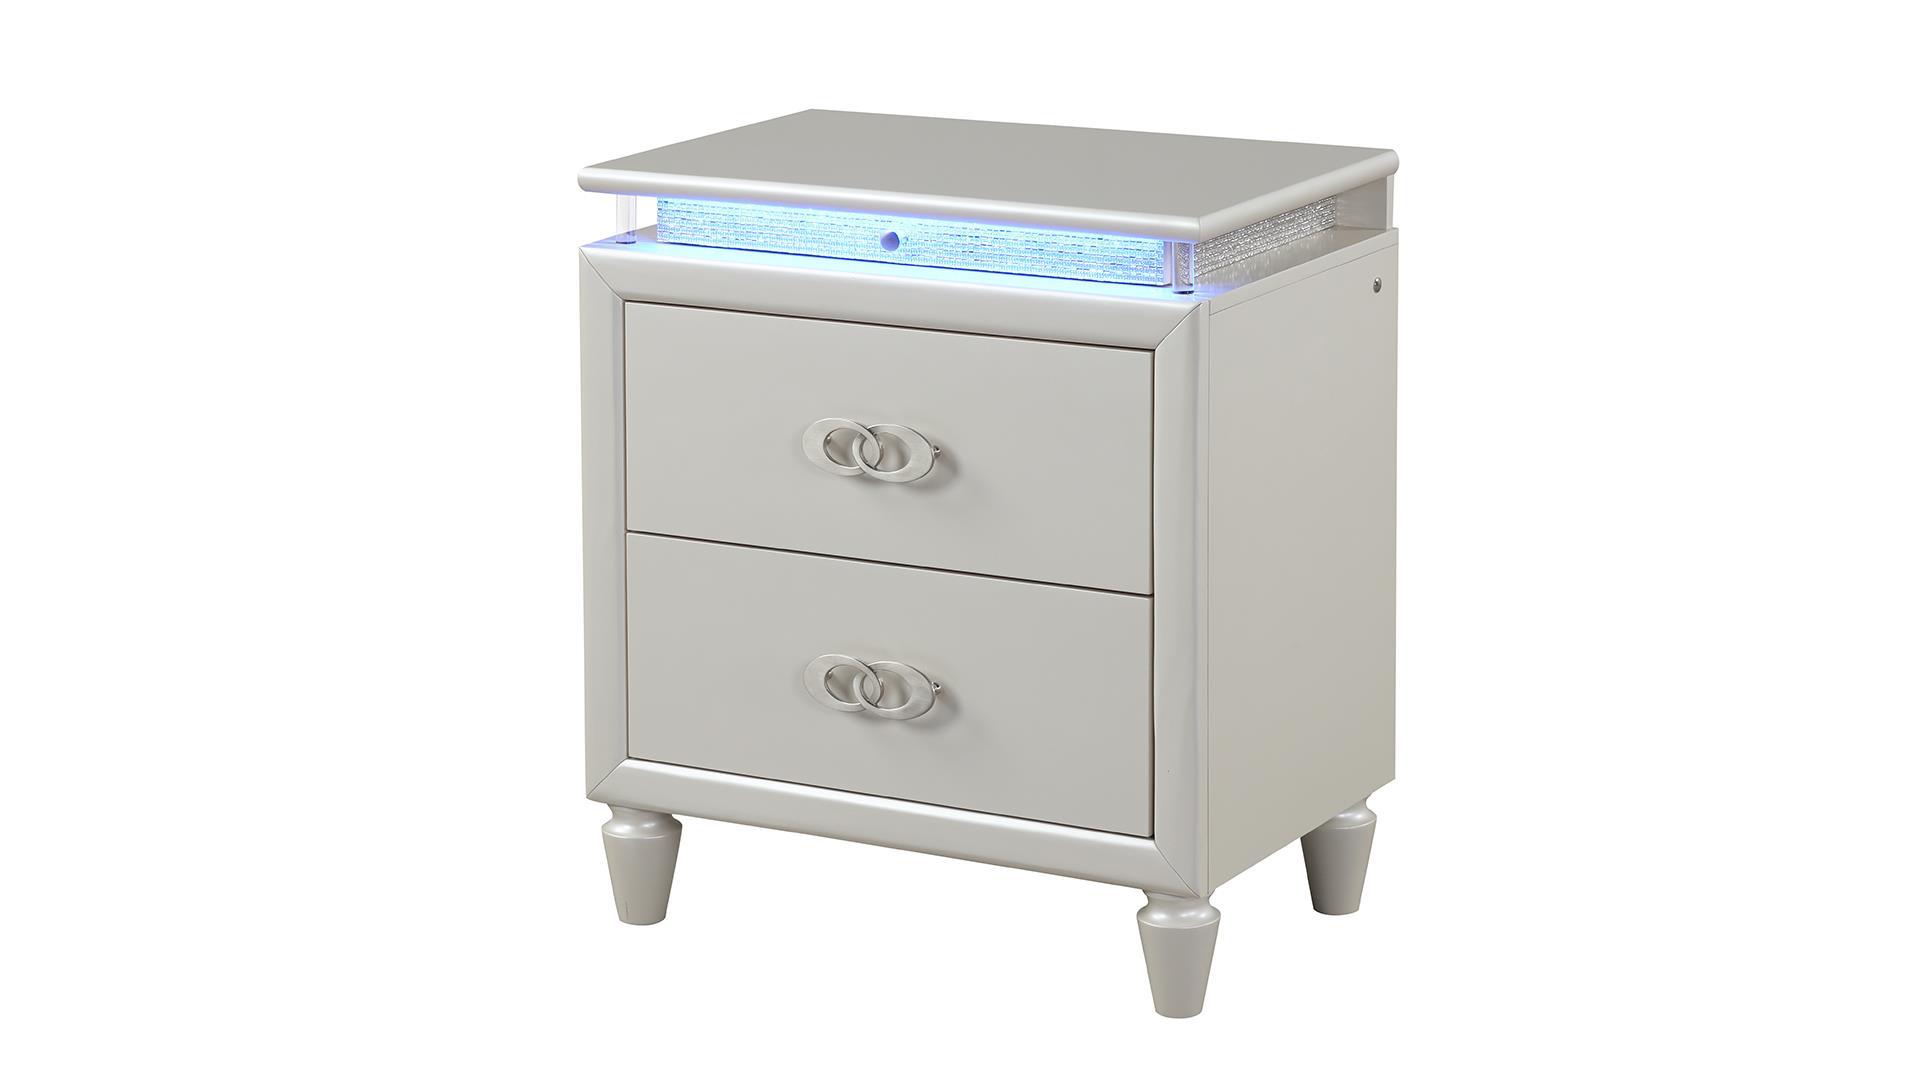 

    
Milky White Led 3 Drawer Nightstand Set 2 Pcs PASSION Galaxy Home Contemporary
